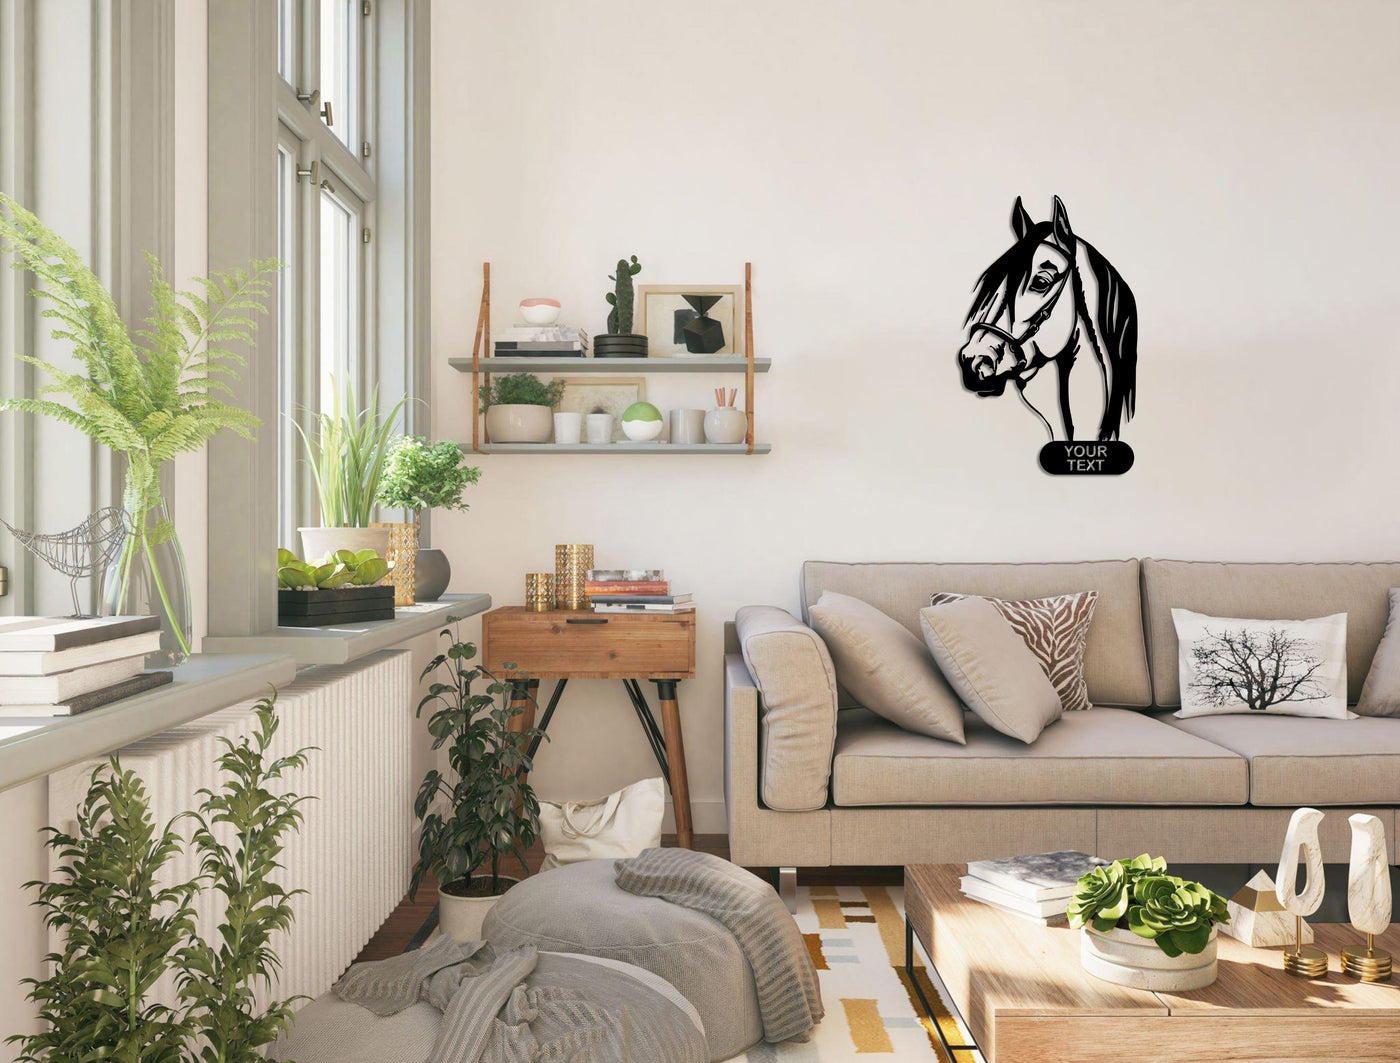 Personalized Horse Metal Wall Art